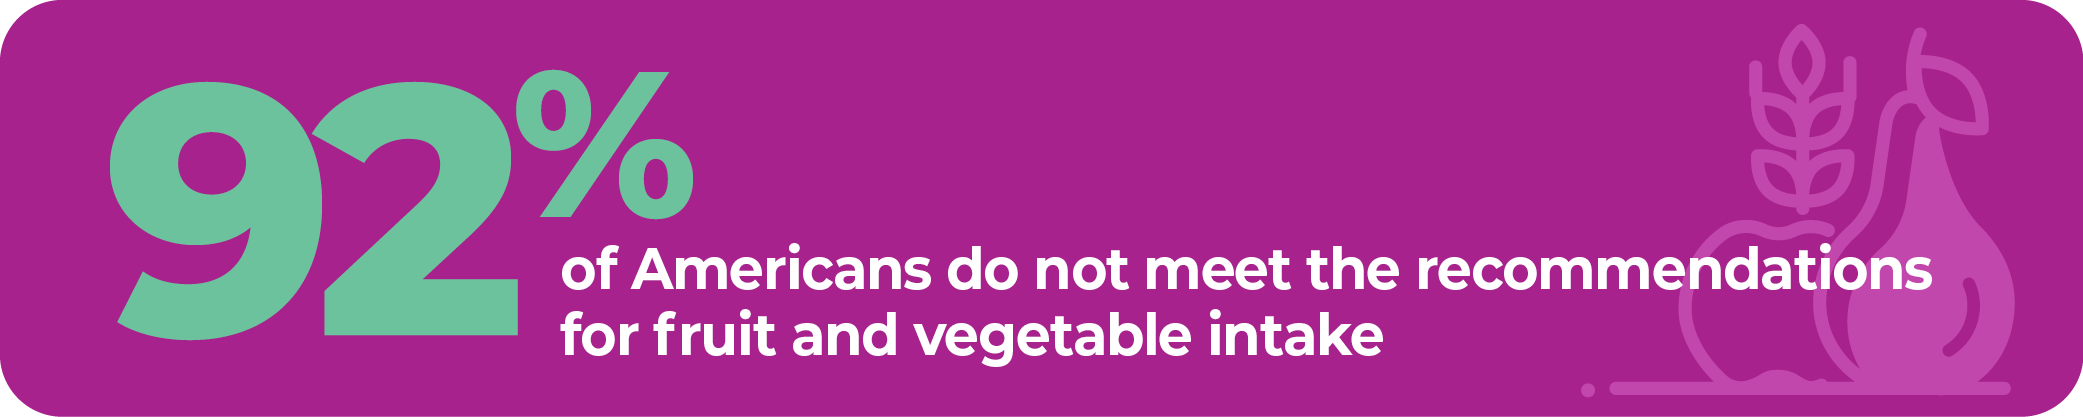 92% of Americans do not meet the recommendations for fruit and vegetable intake